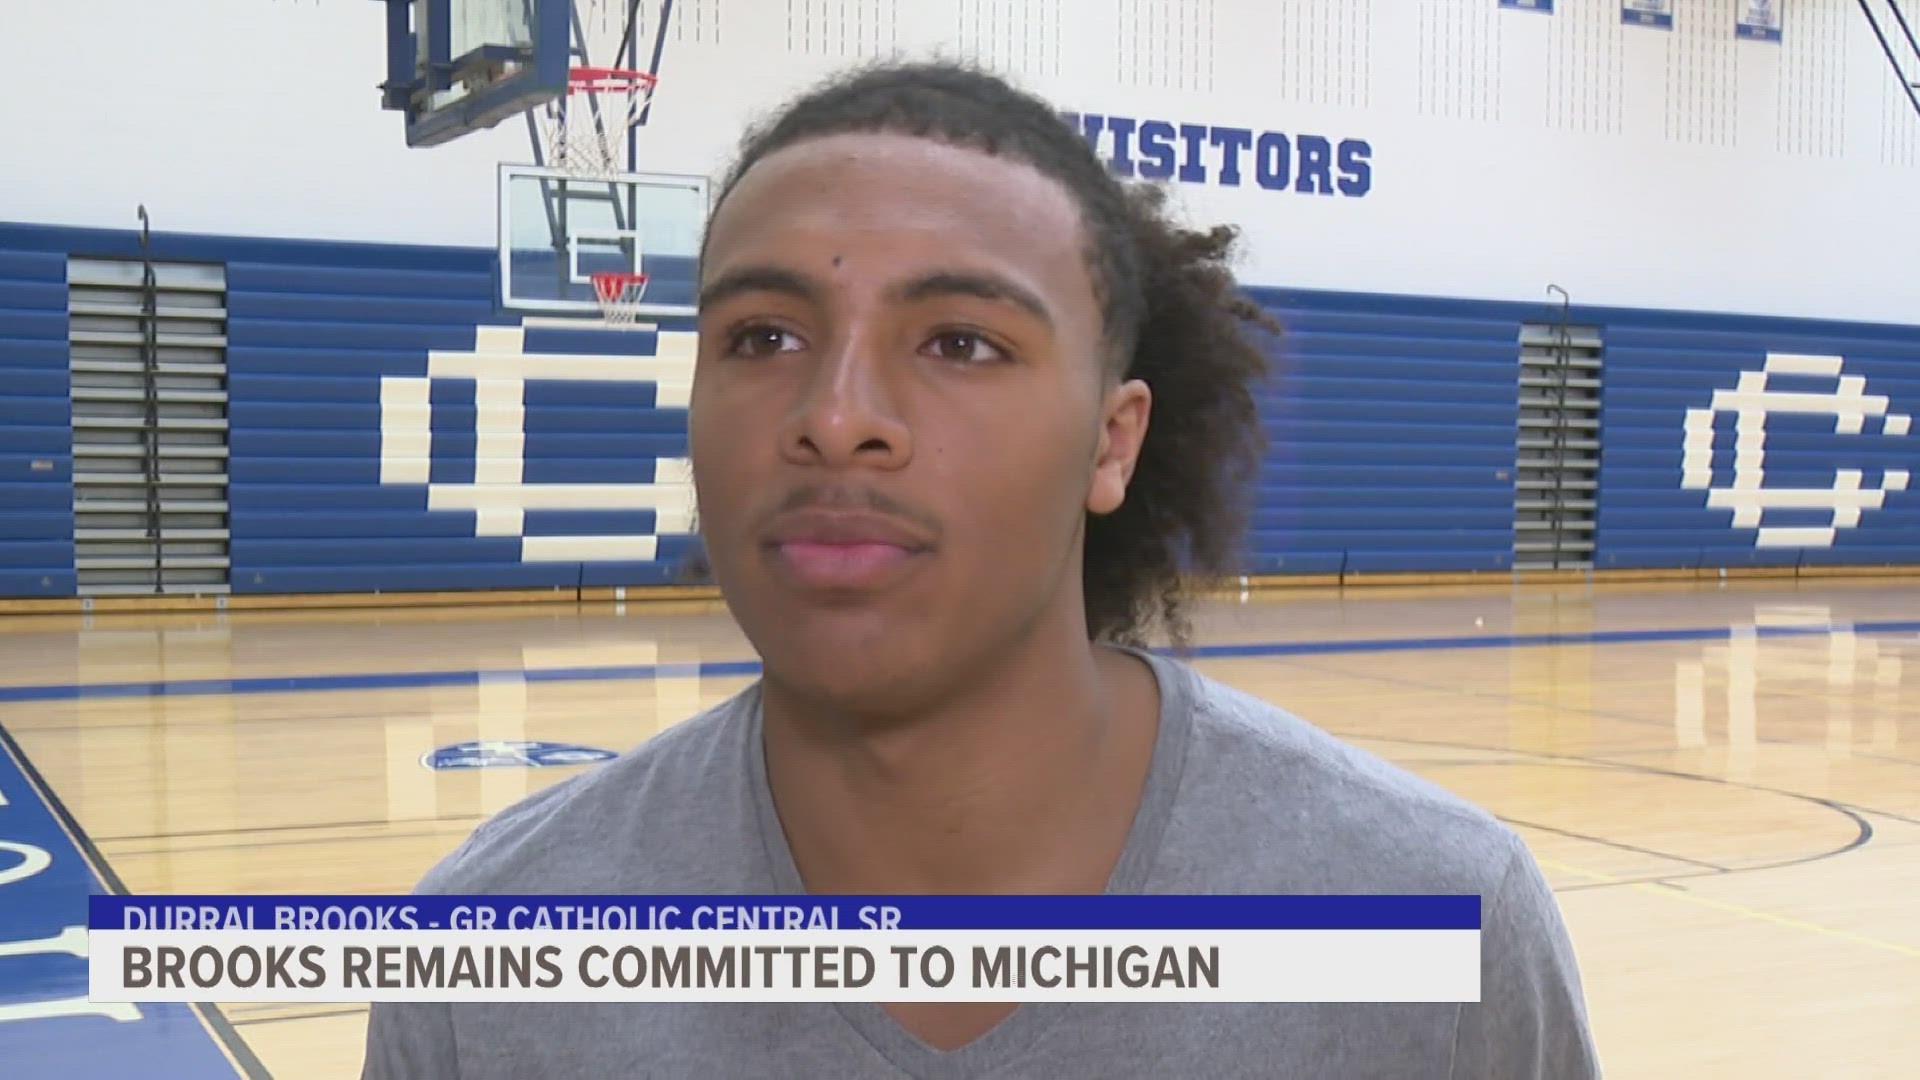 Grand Rapids Catholic Central star Durral Brooks remains loyal to Michigan.